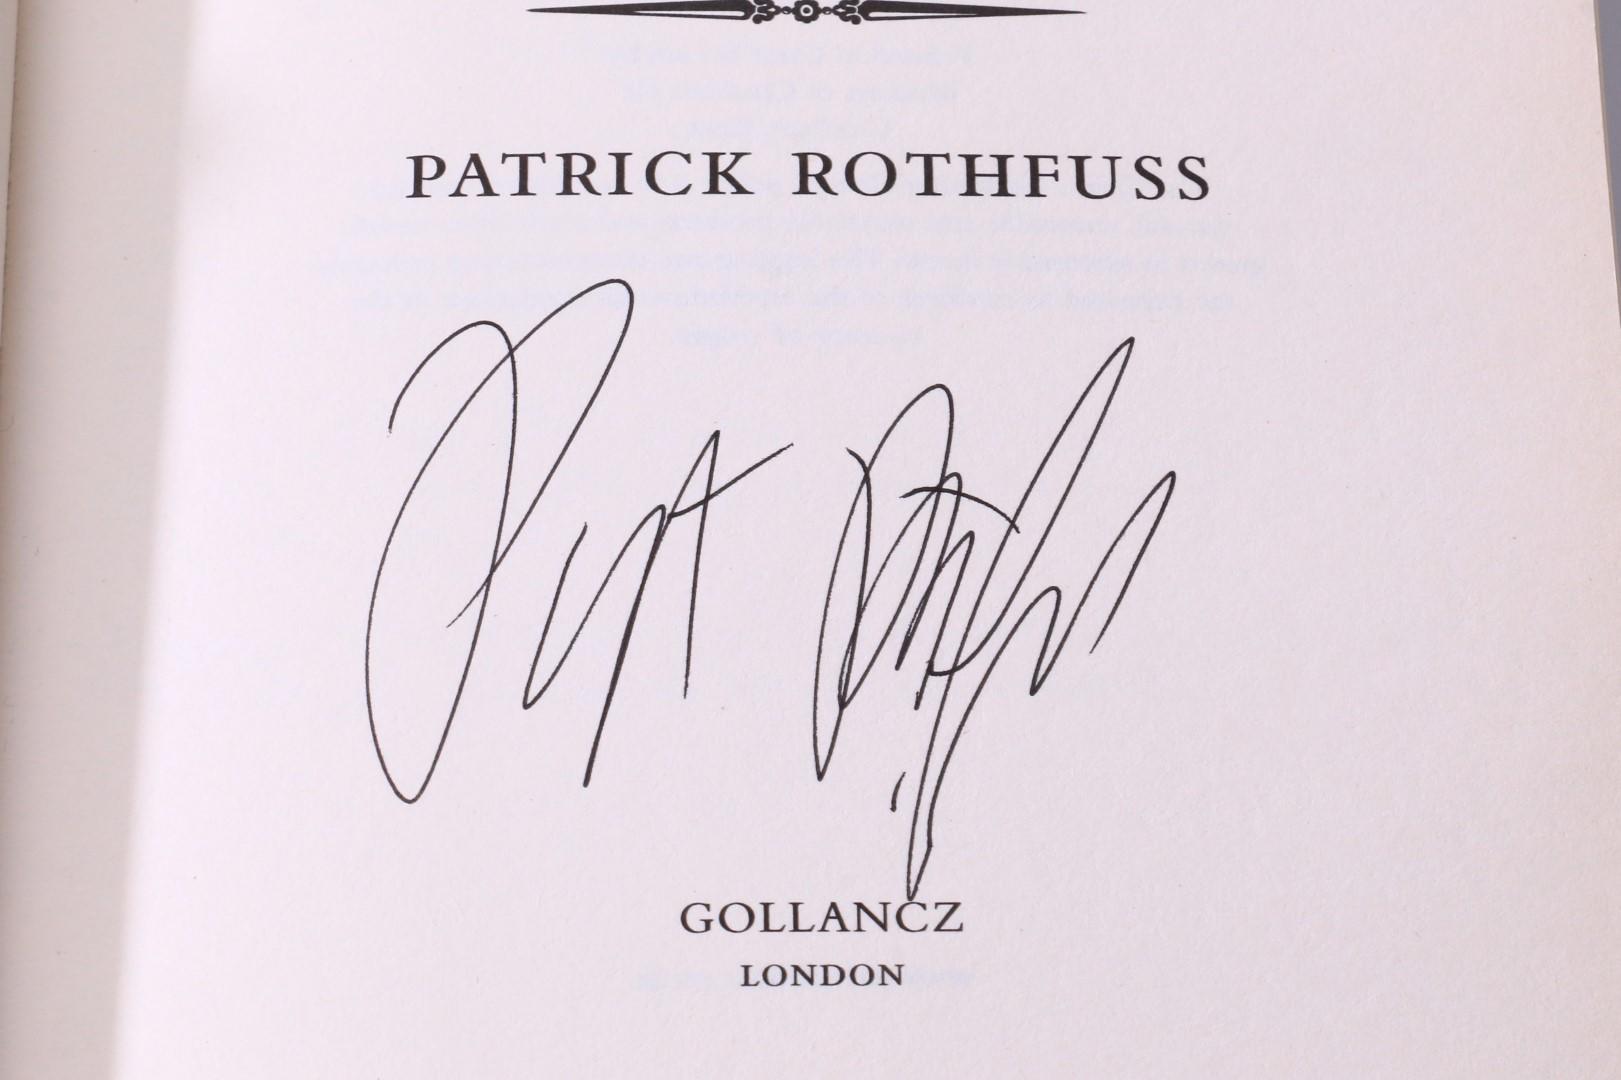 Patrick Rothfuss - The Name of the Wind - Gollancz, 2007, Signed First Edition.